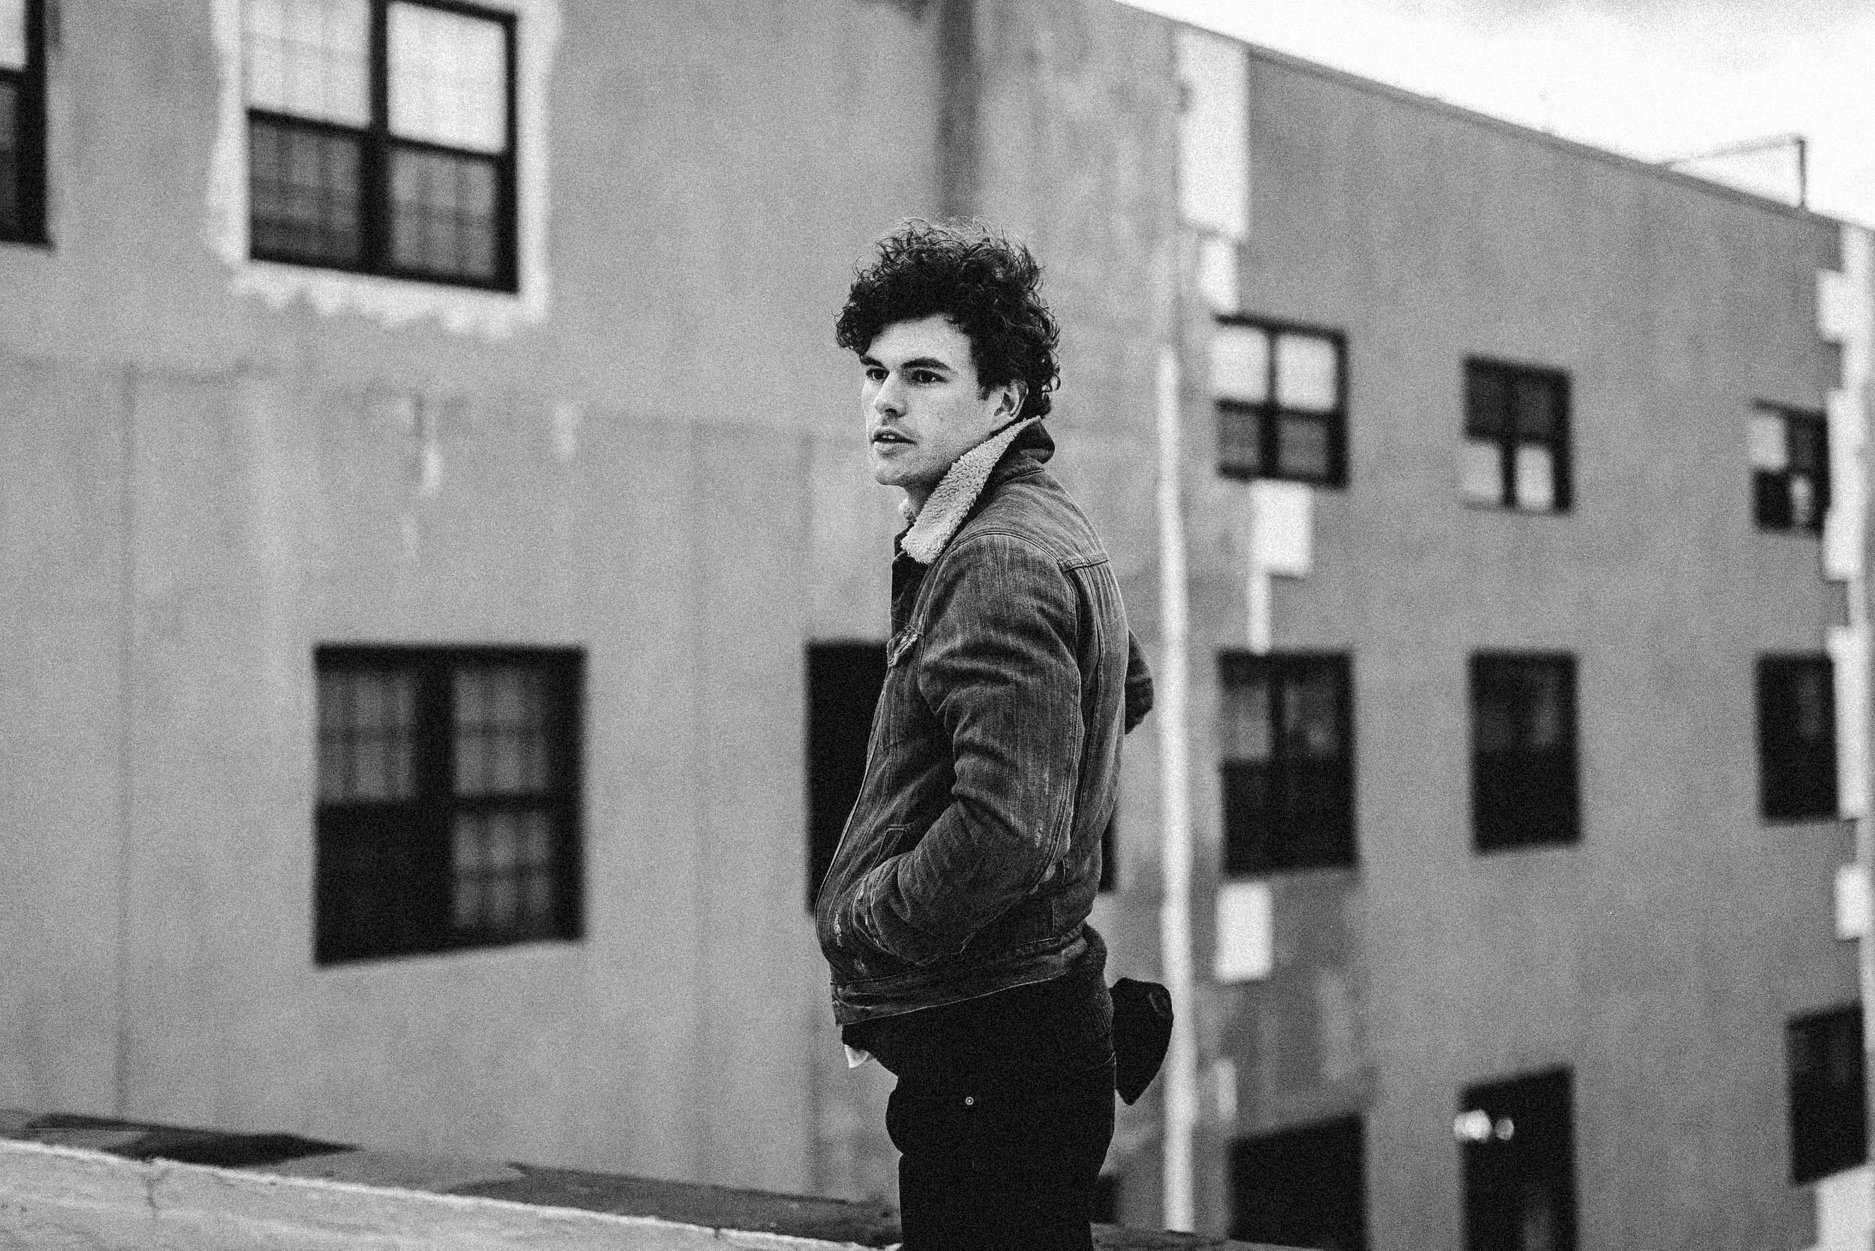 Vance Joy on songwriting, album artwork and the desire for affirmation from fans